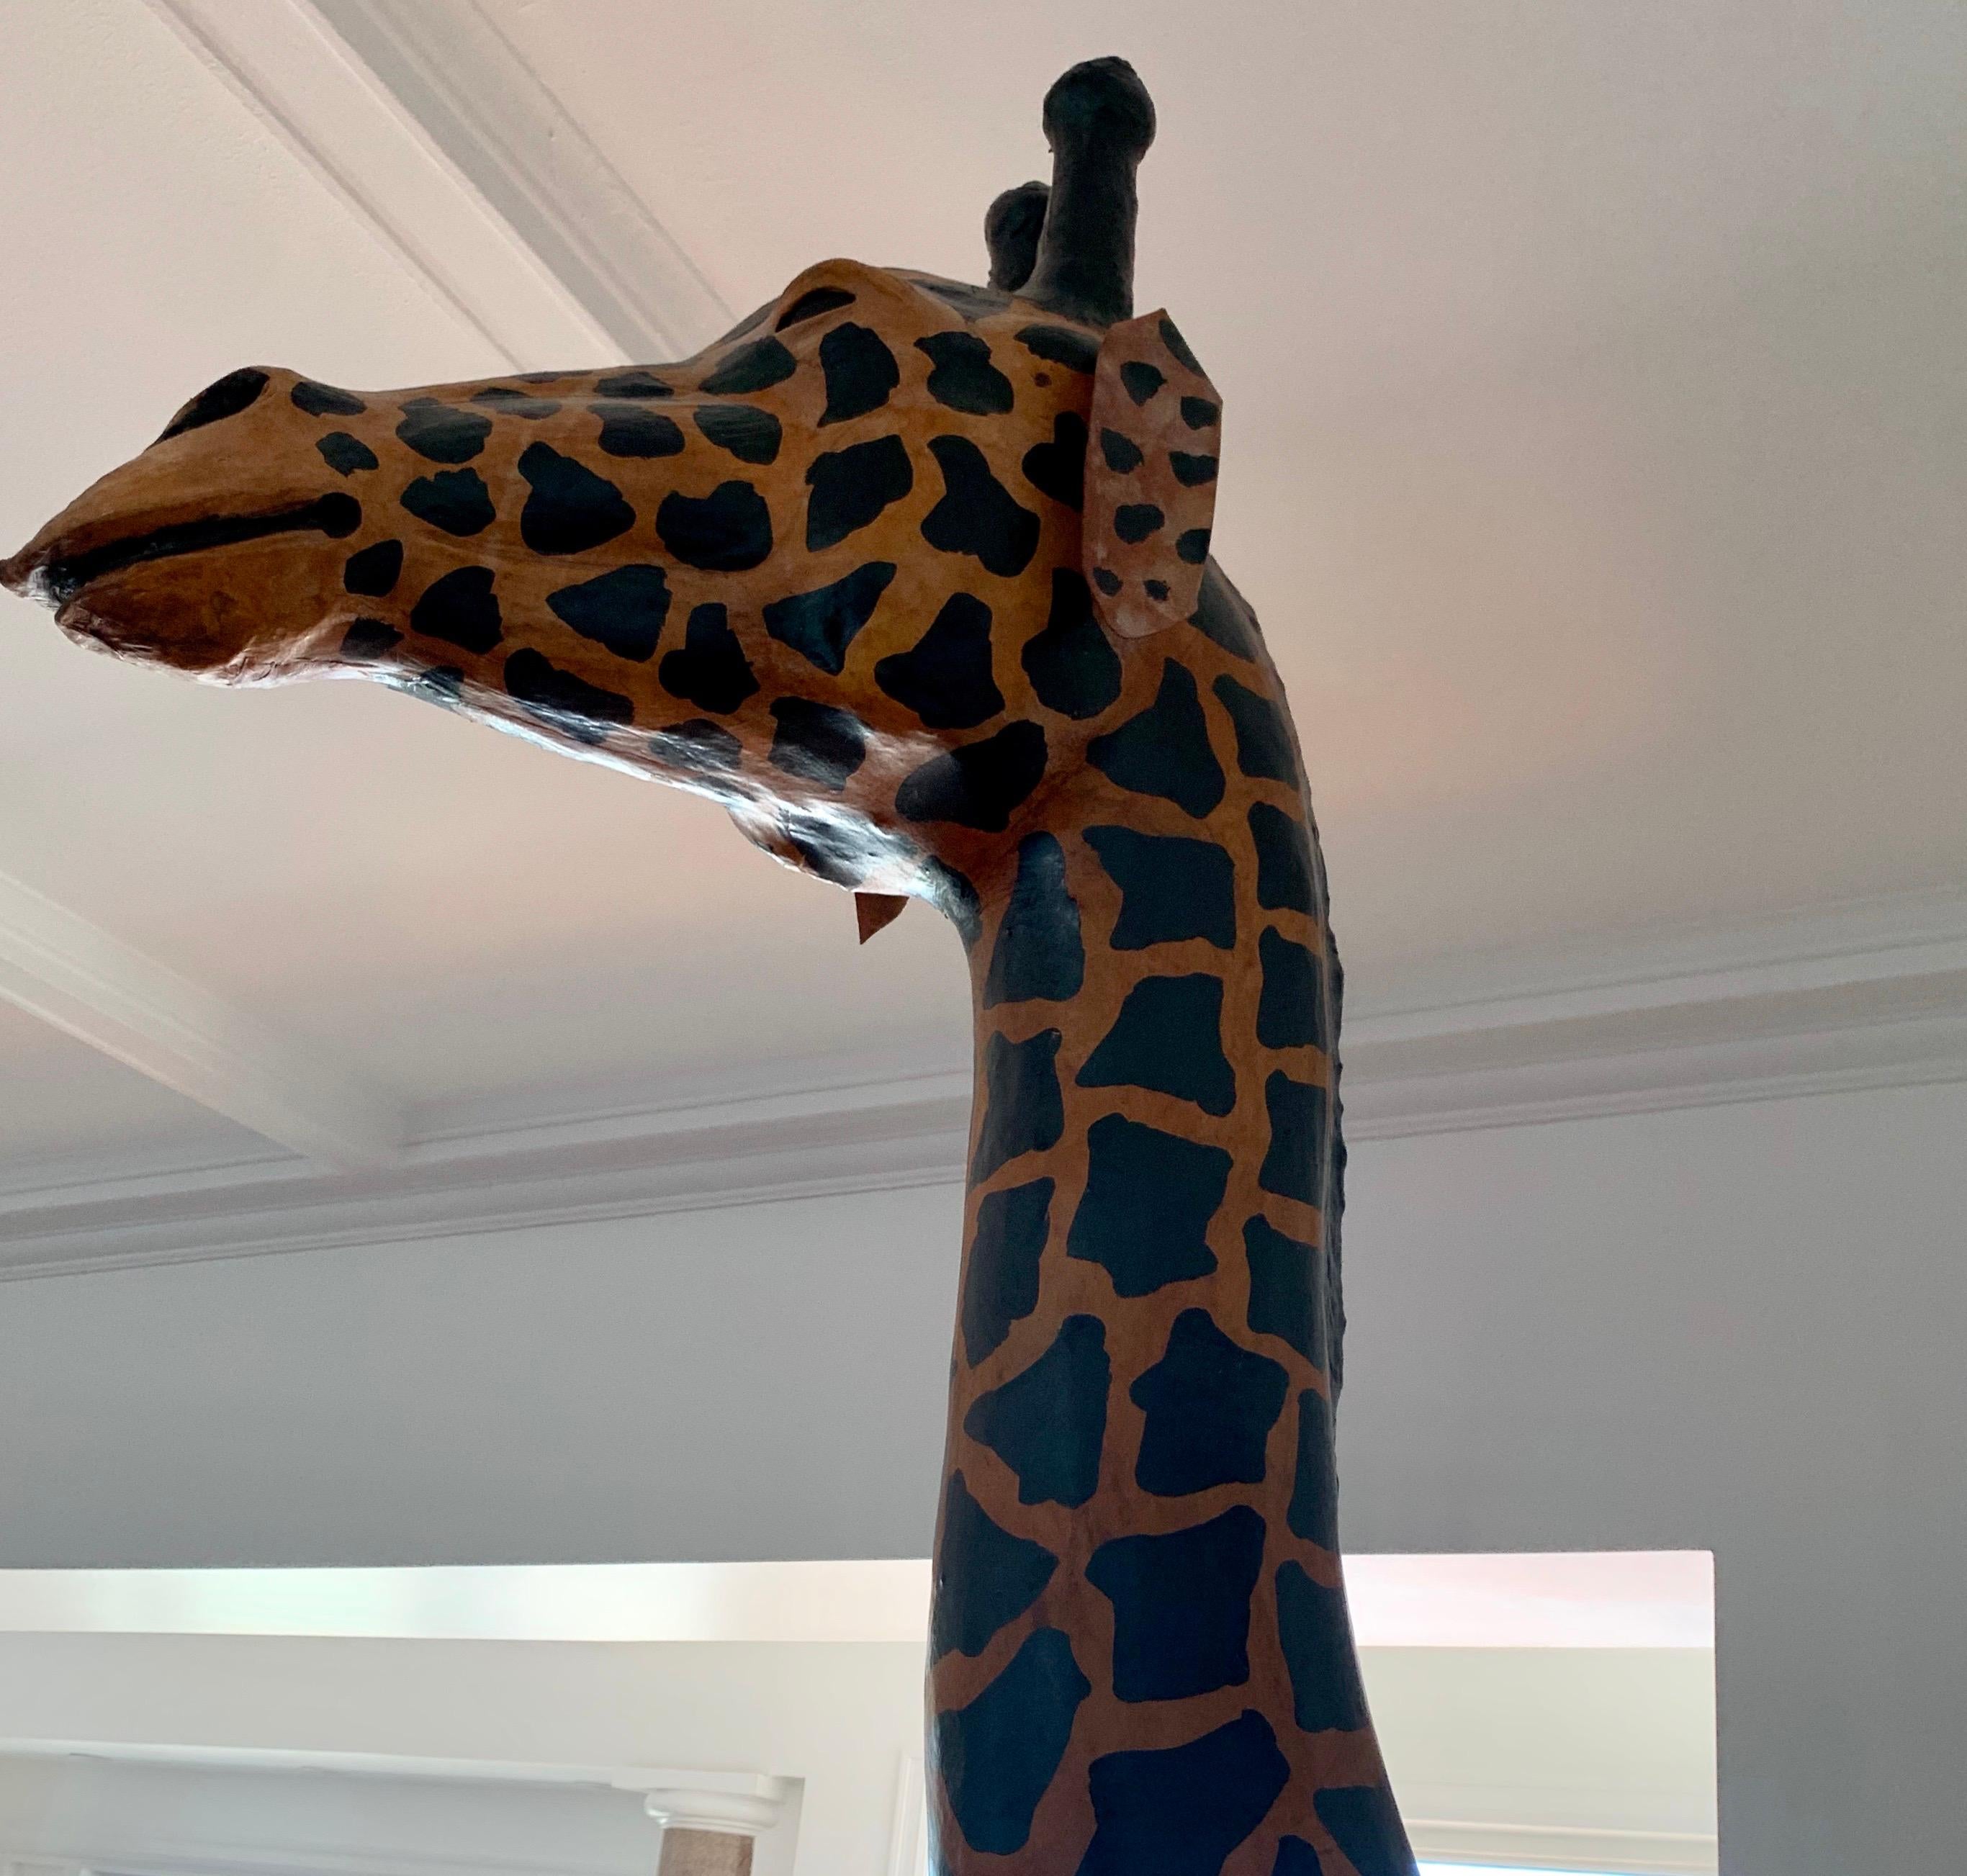 Large Life-Size Leather Giraffe Sculpture Almost Nine Feet Tall 1